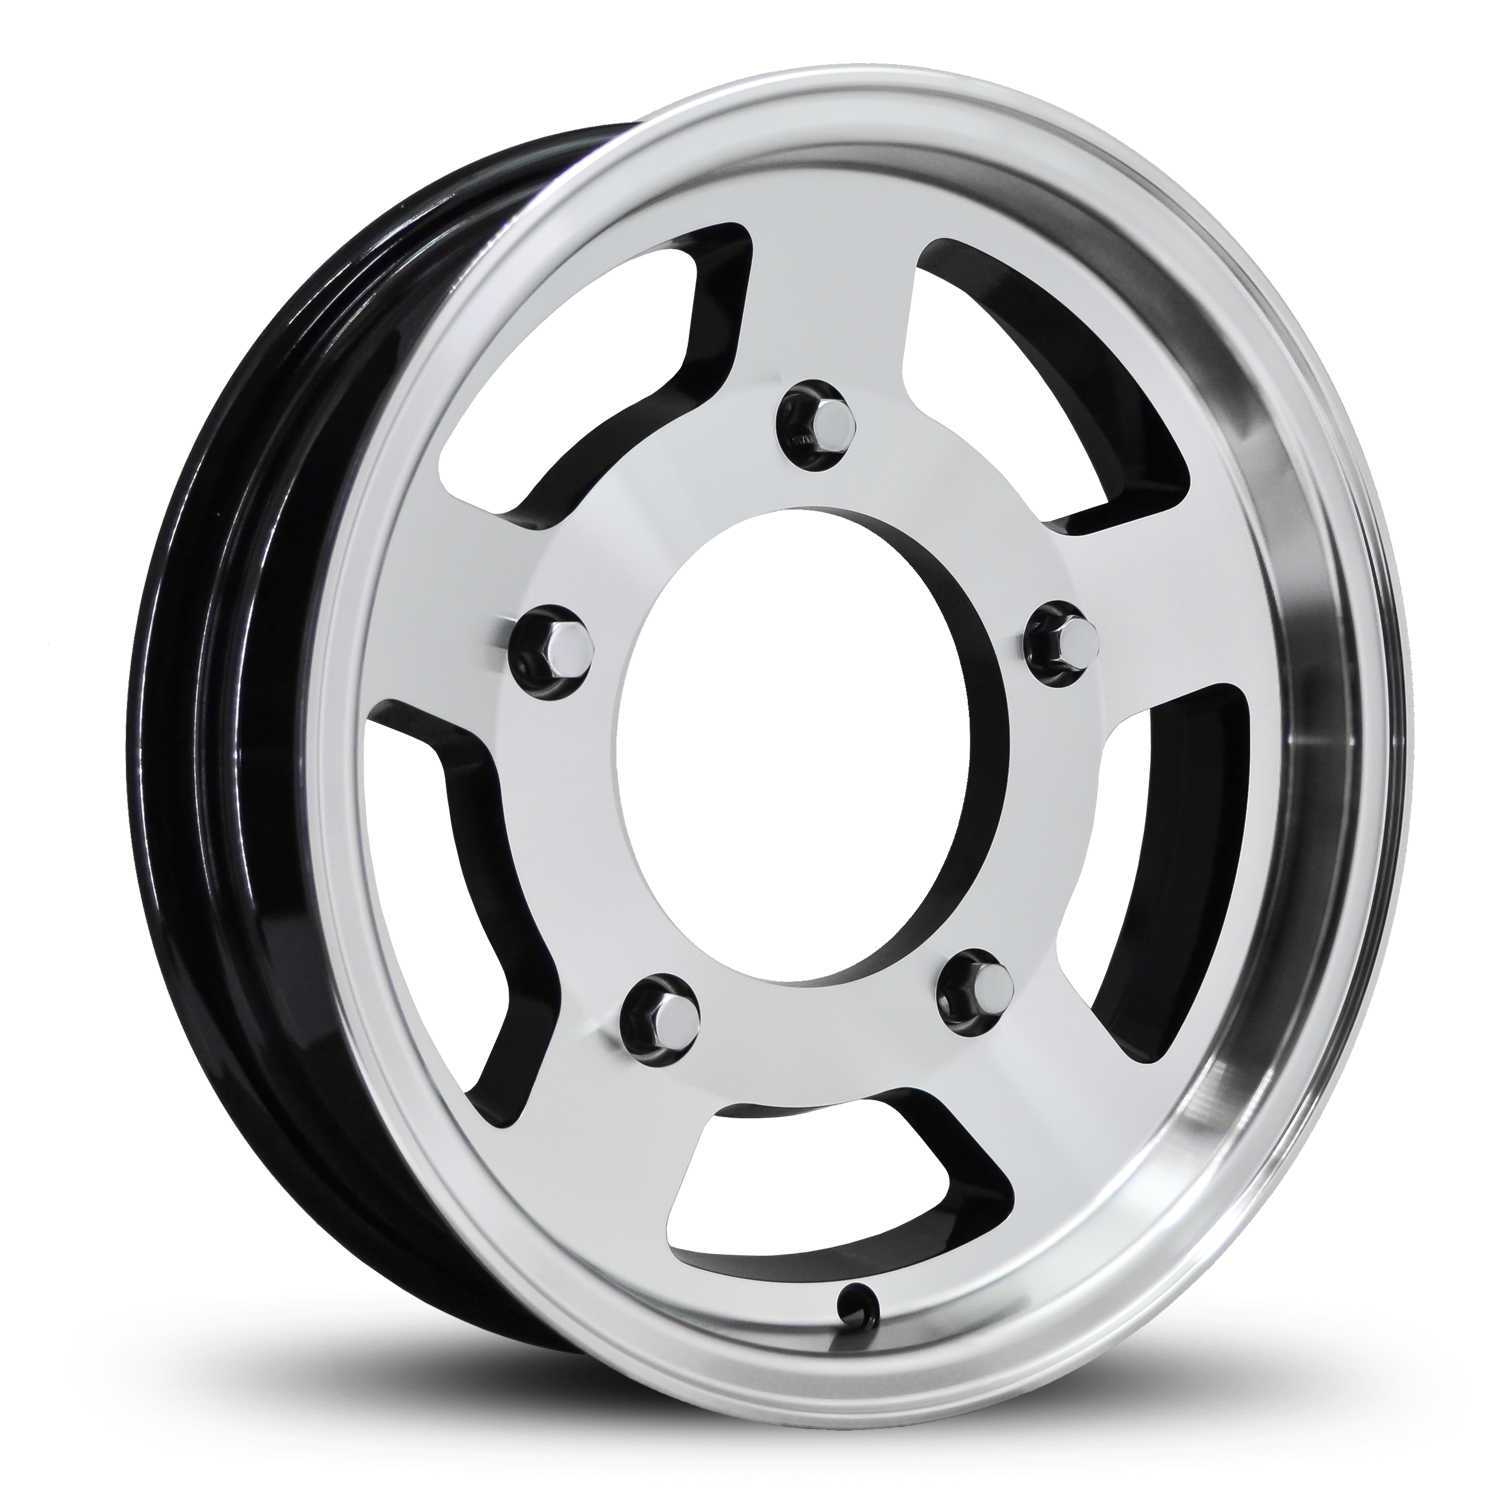 Shop the Klassic Rader Dune Replica Style Dune Buggy Staggered Rims